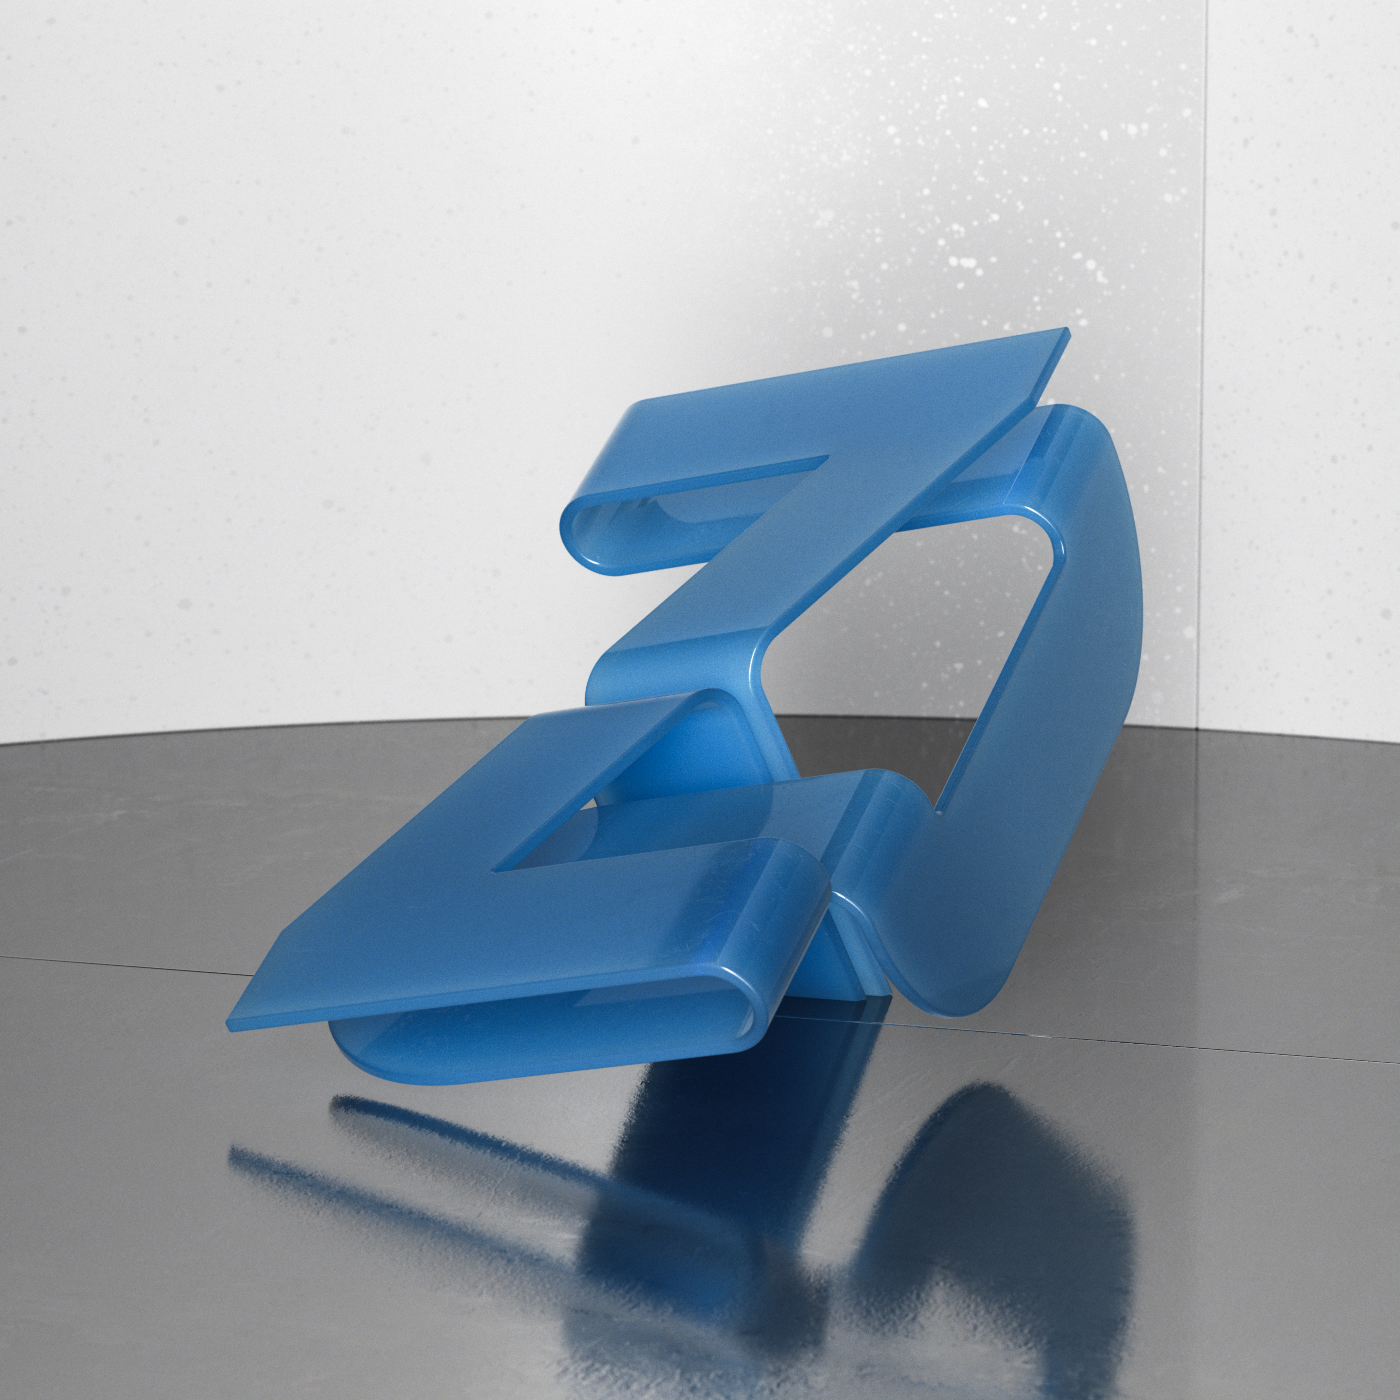 3D CGI 3DType type lettering 36DOT 36daysoftype font minimal abstract